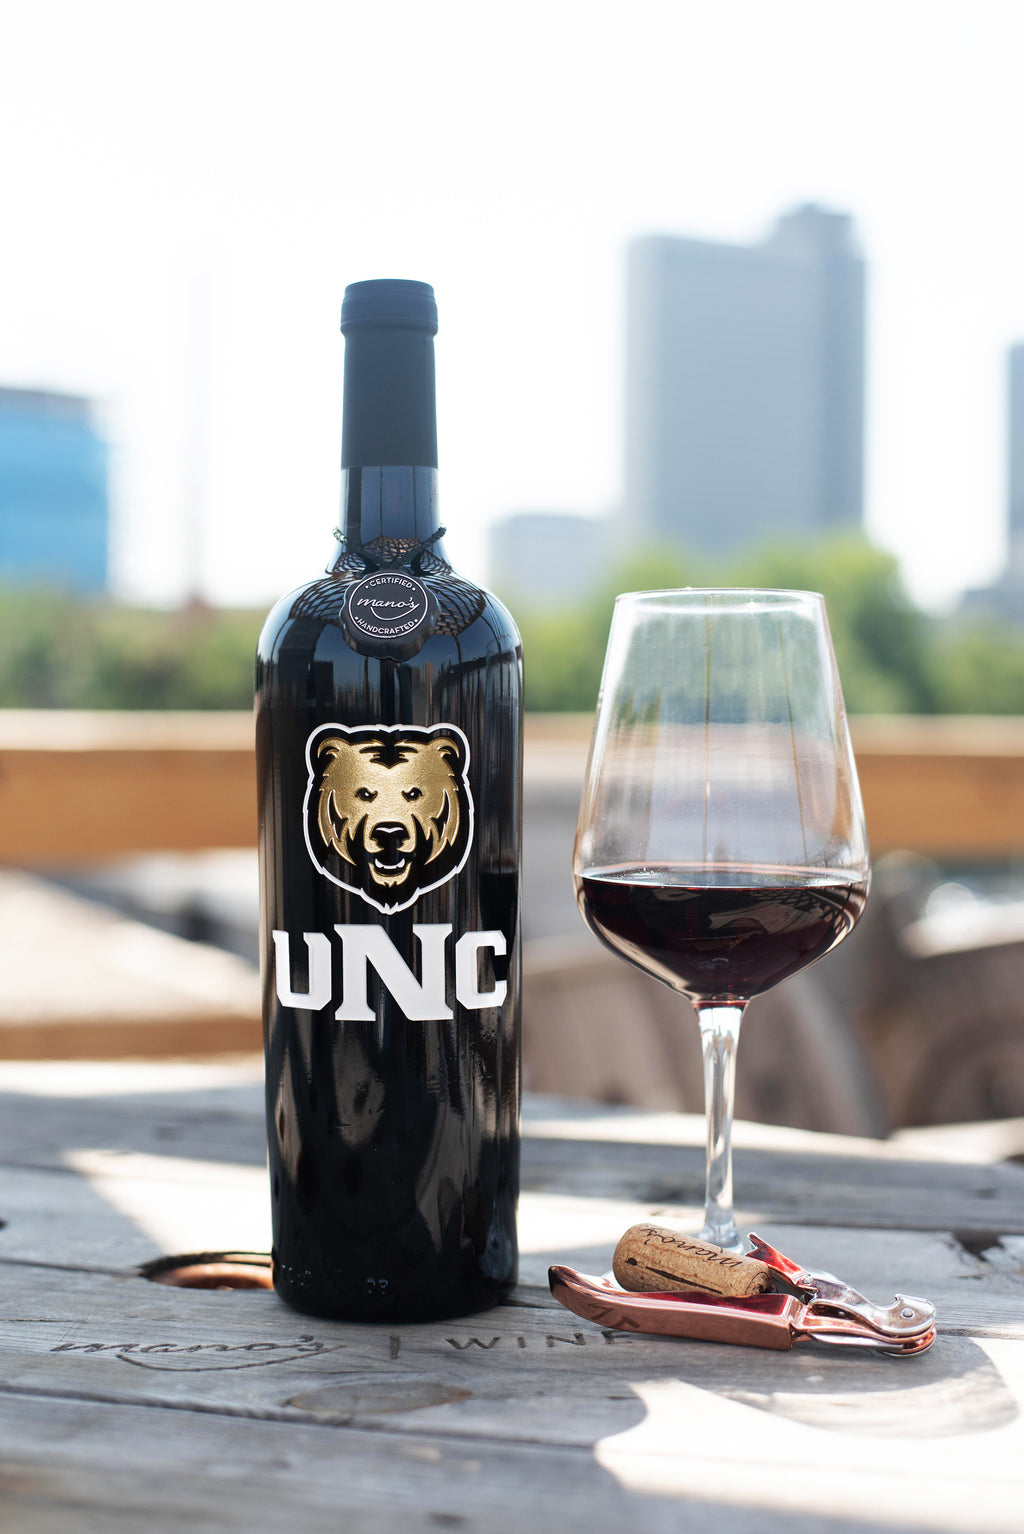 University of Northern Colorado Etched Wine Bottle